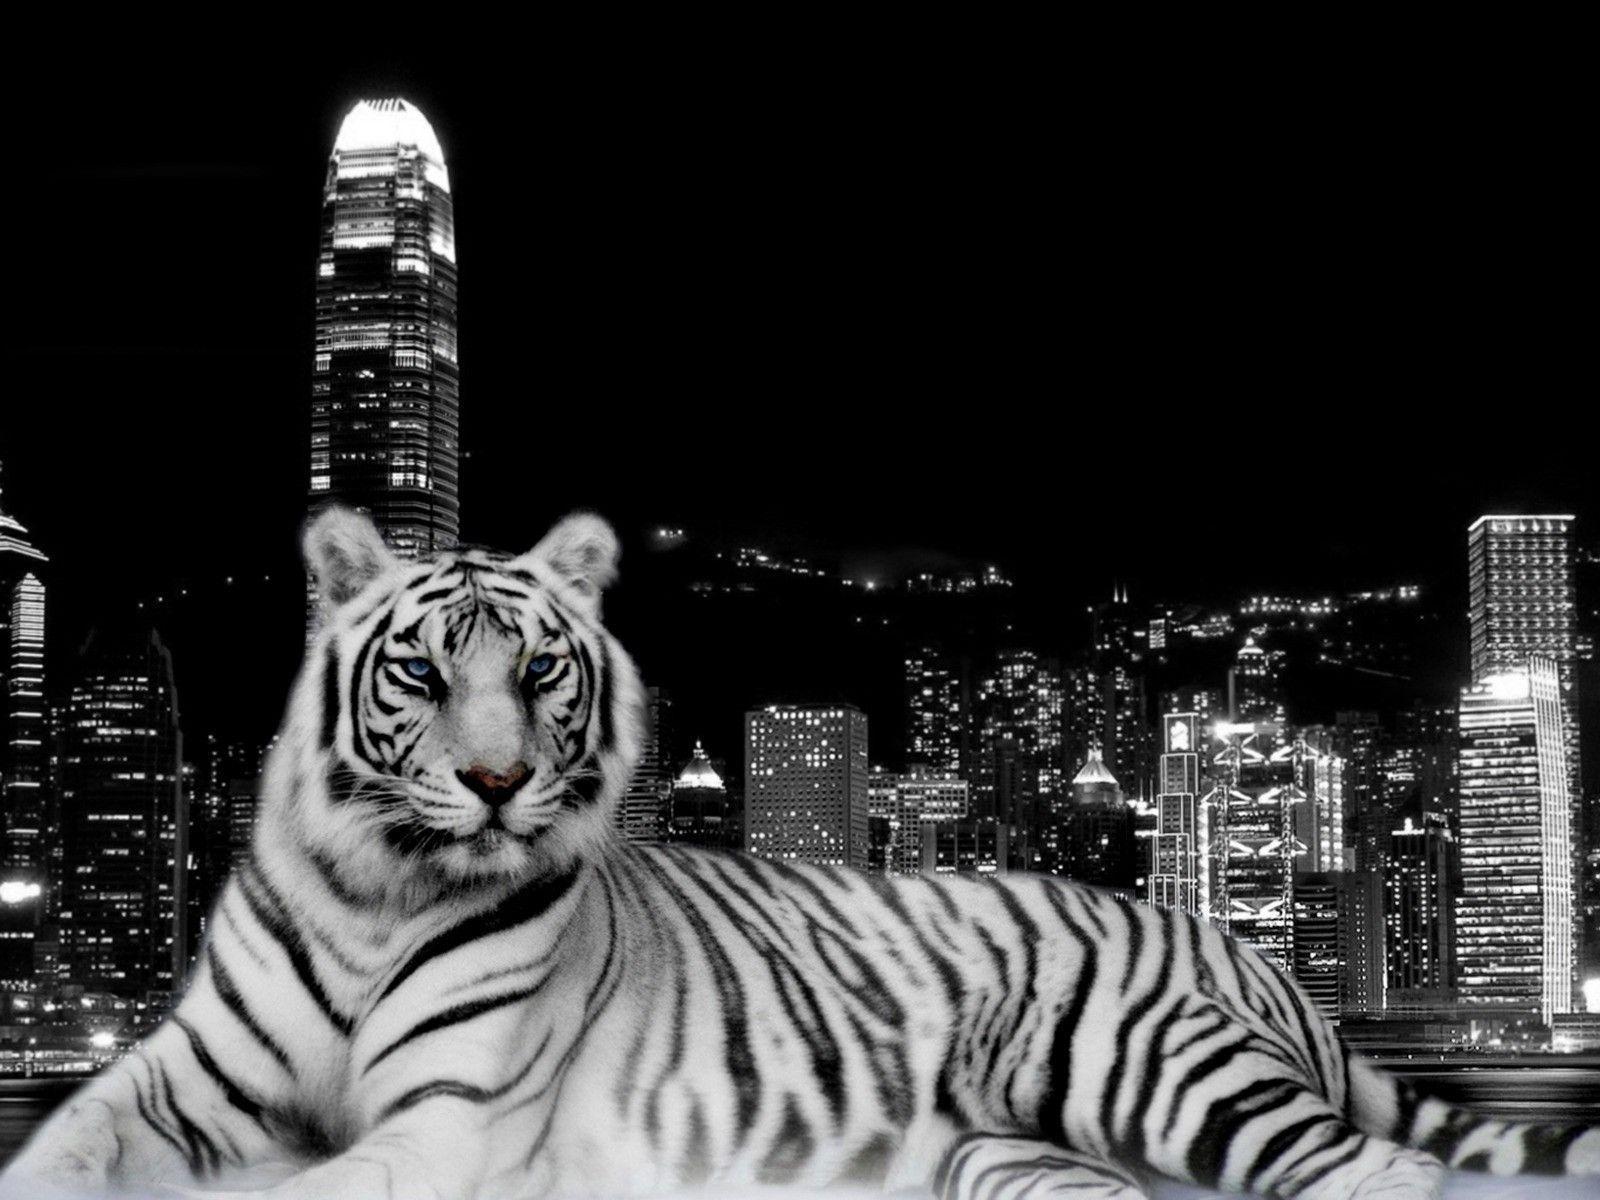 White Tiger and City Skyline at Night Free Stock Photo and Wallpapers